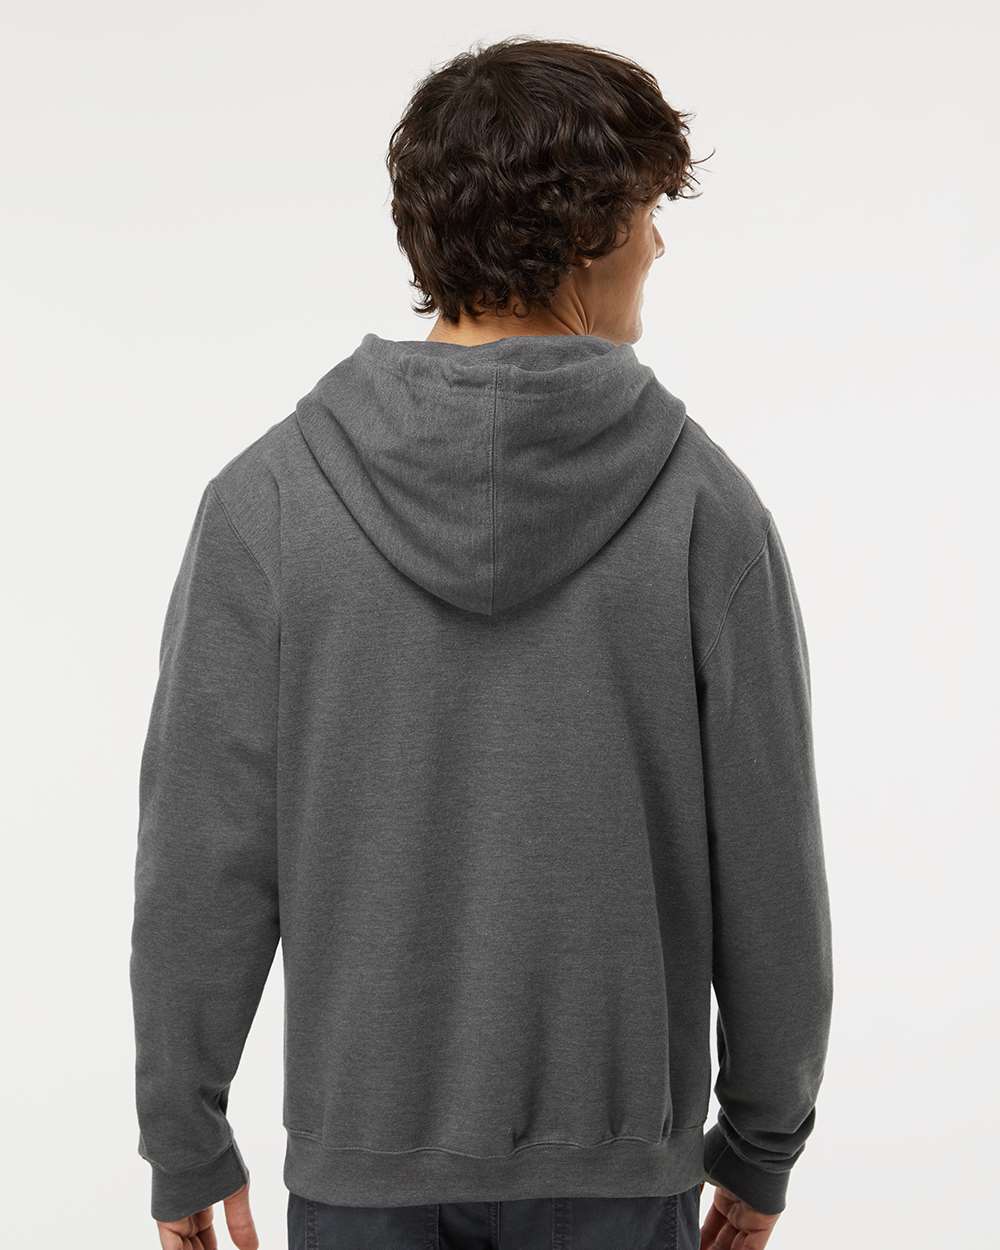 M&O Unisex Pullover Hoodie 3320 #colormdl_Heather Charcoal